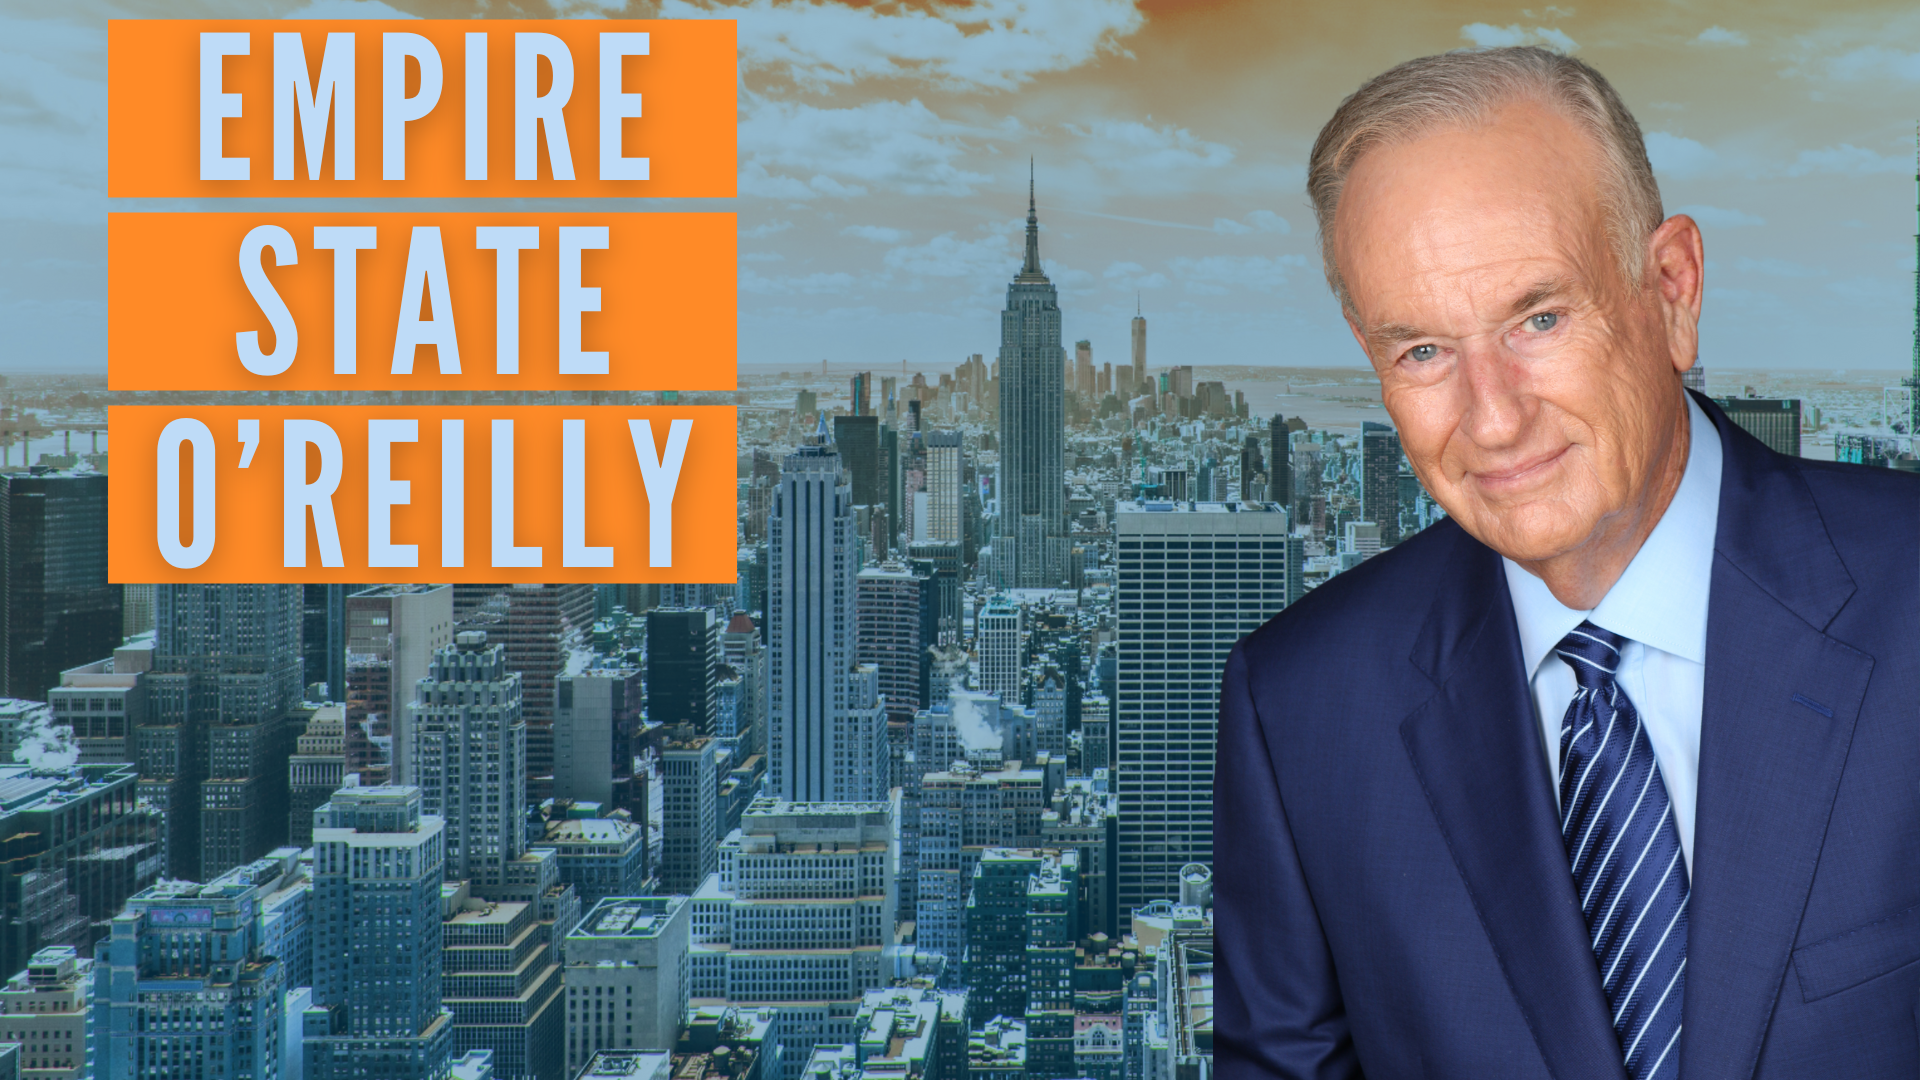 Empire State O'Reilly: Freedom in America